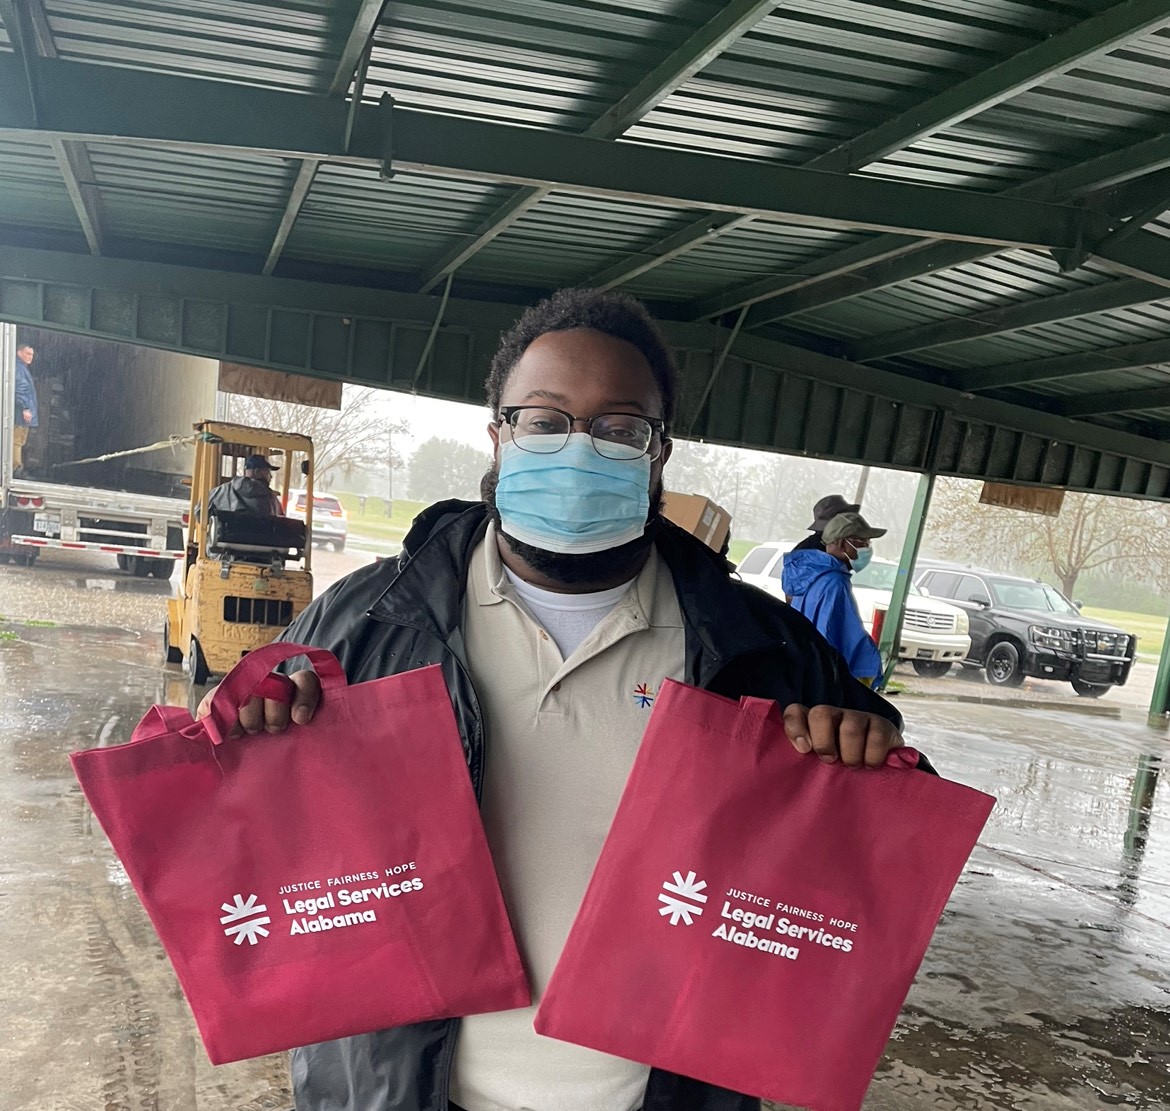 REIP Staff Attorney Donavon McGuire joined a Selma foodbank food give-away to help hand out meals and educate participants about LSA services.